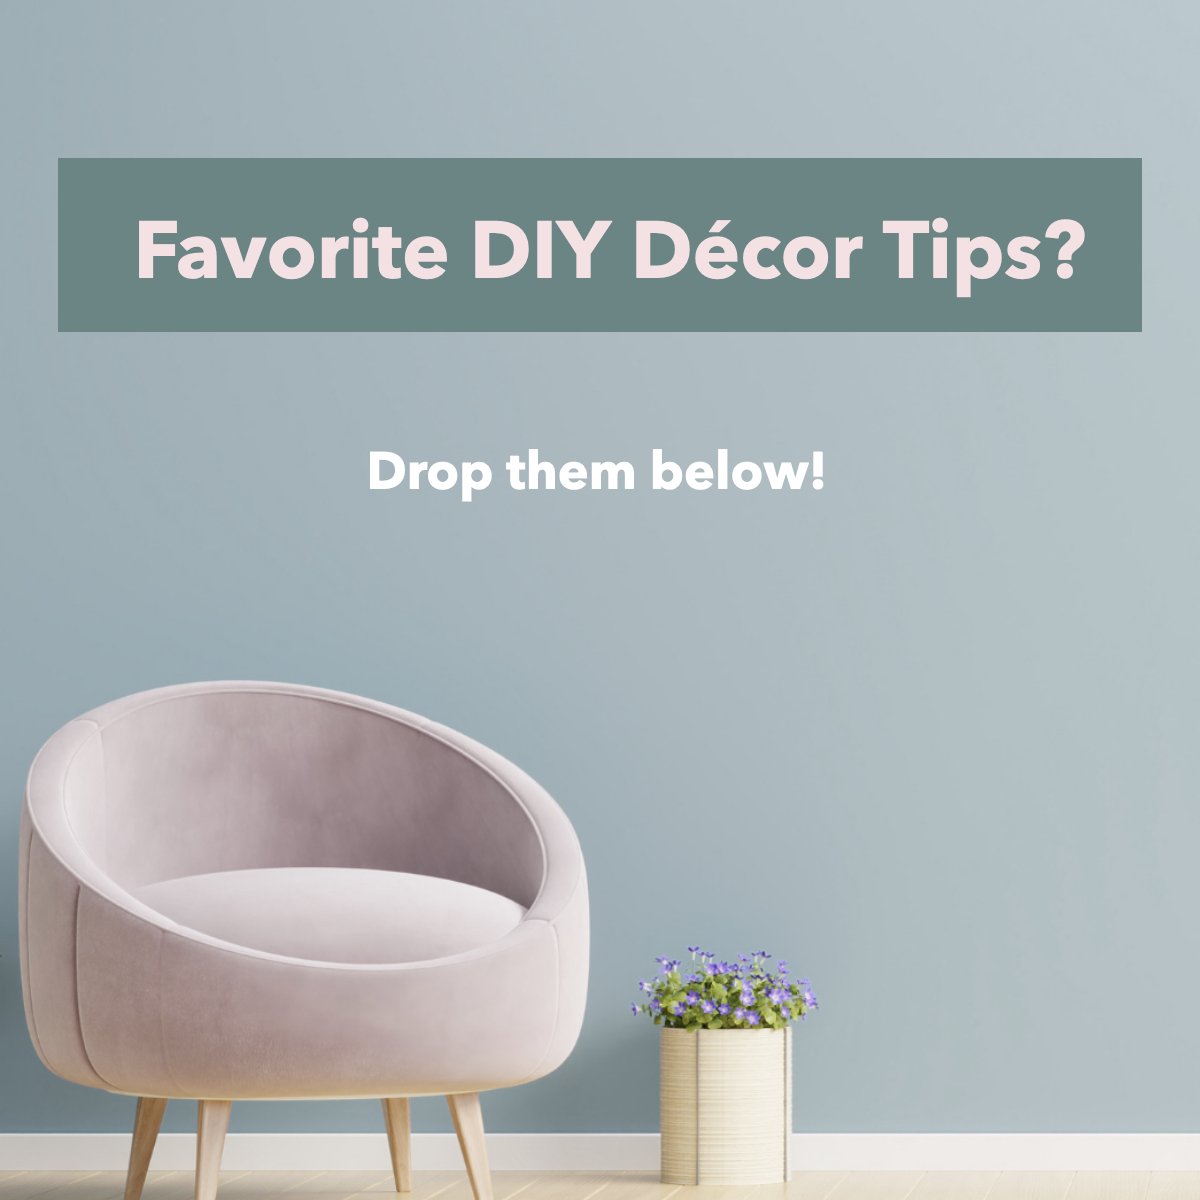 We want you to share your tips with us!!!

Drop them in the comments 💭! 

#DIY #Question #Interiordesign #designtips #DIYdecor
 #realestate #CassieDealy #Senne #Realtor #HomeBuyer #HomeSeller #HomeOwner #JamesTrano #firsttimehomebuyer #HomeBuyerTips #HomeSellerTips